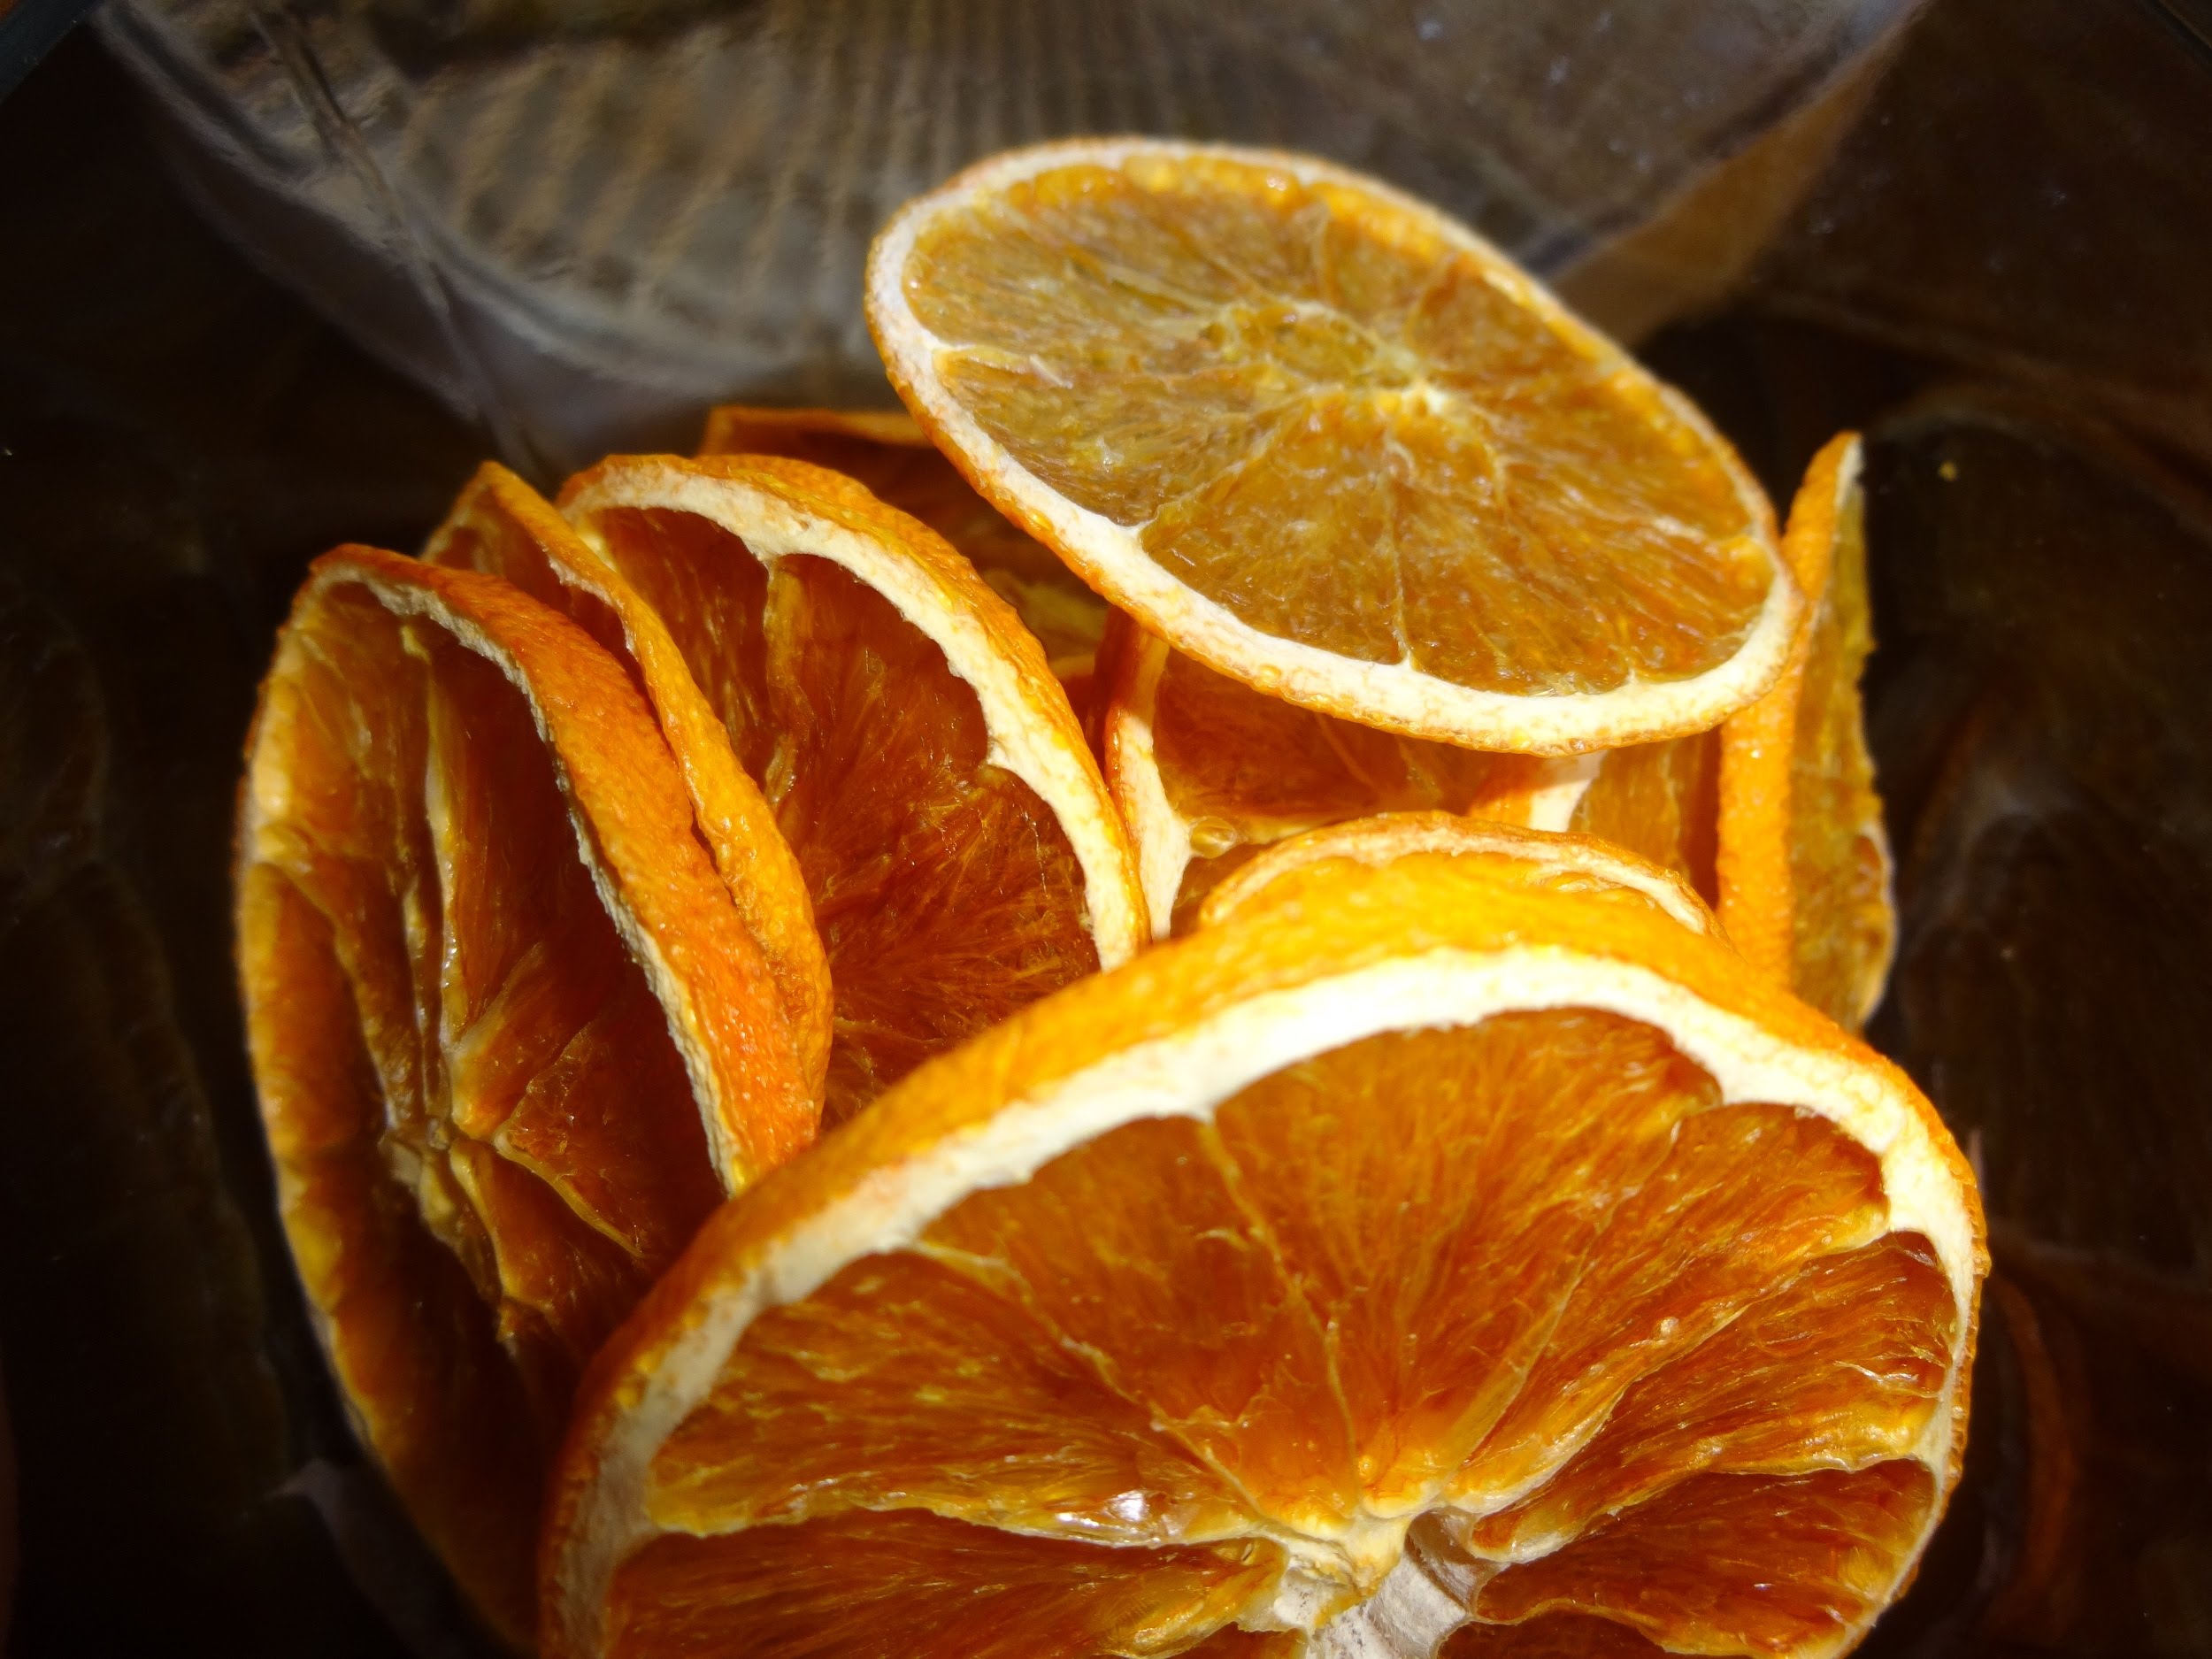 Dehydrating Orange slices for long term storage - YouTube